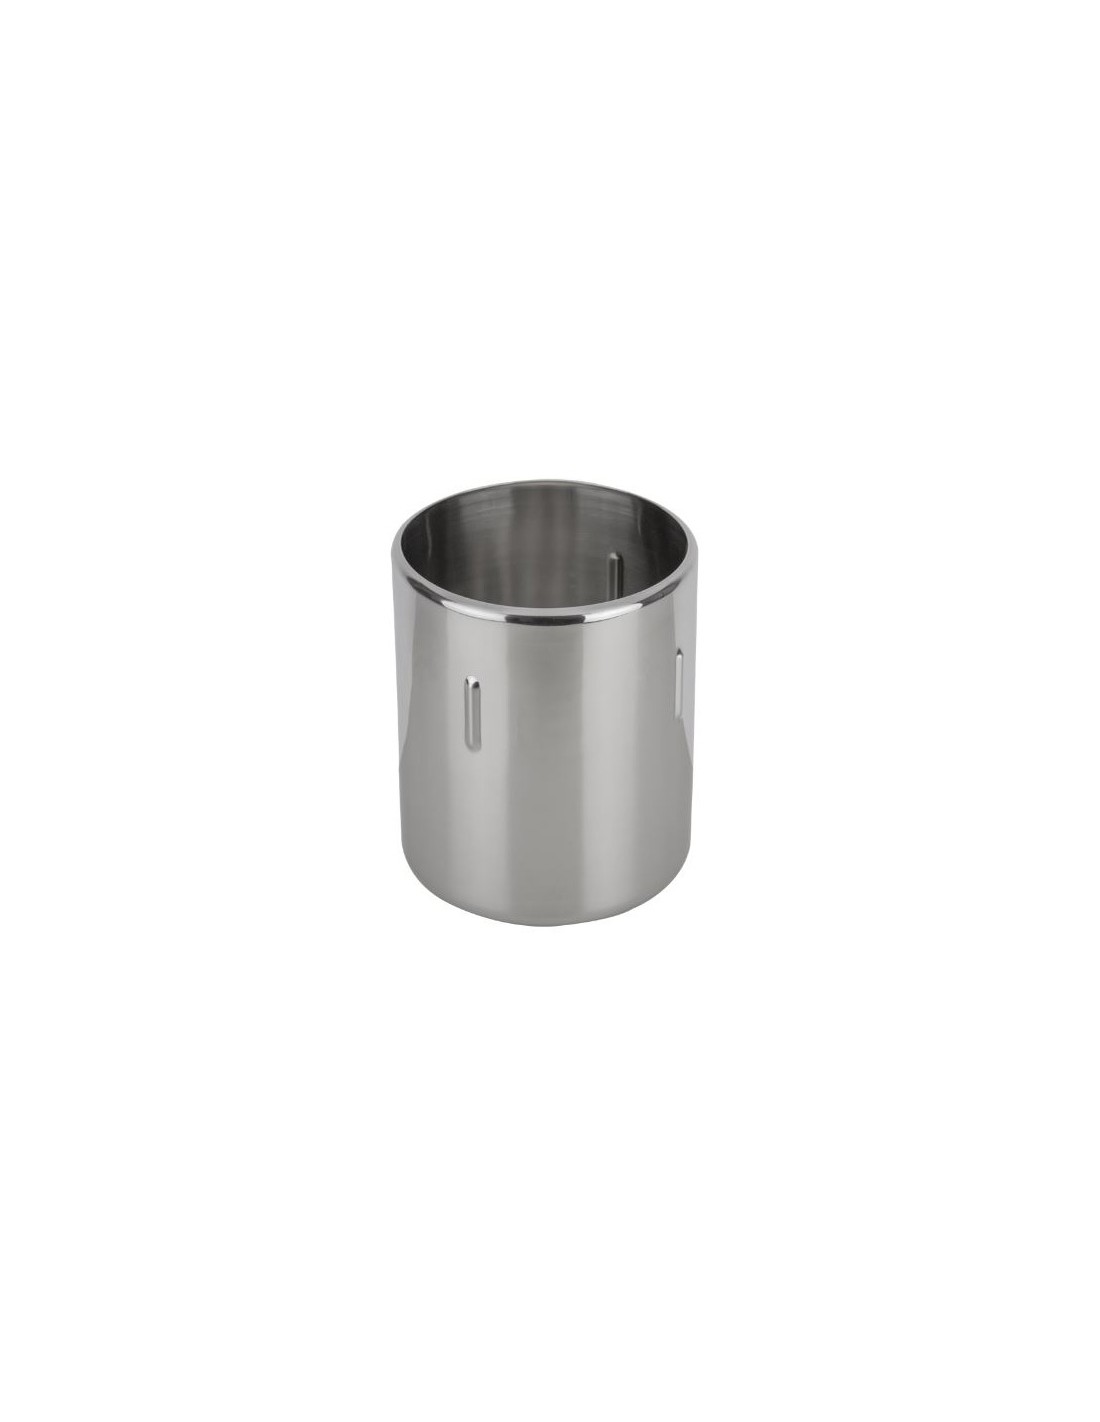 Stainless steel Carapina 7 liters (diam. cm 20 x 25 h)